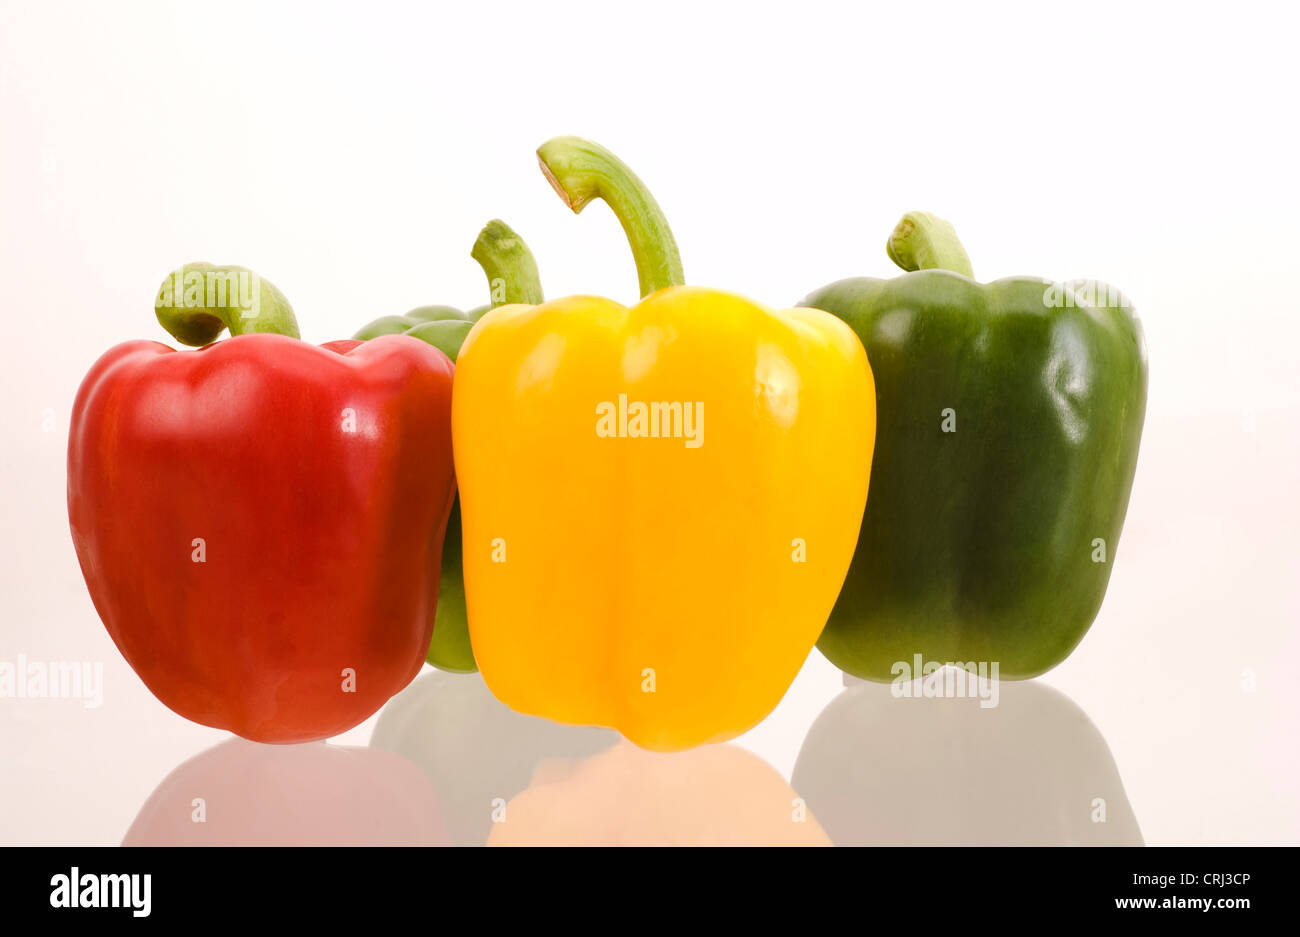 Peppers. Peppers contain vitamin C and vary in colour, due to their maturity. This colour varies through green to yellow to red. Stock Photo